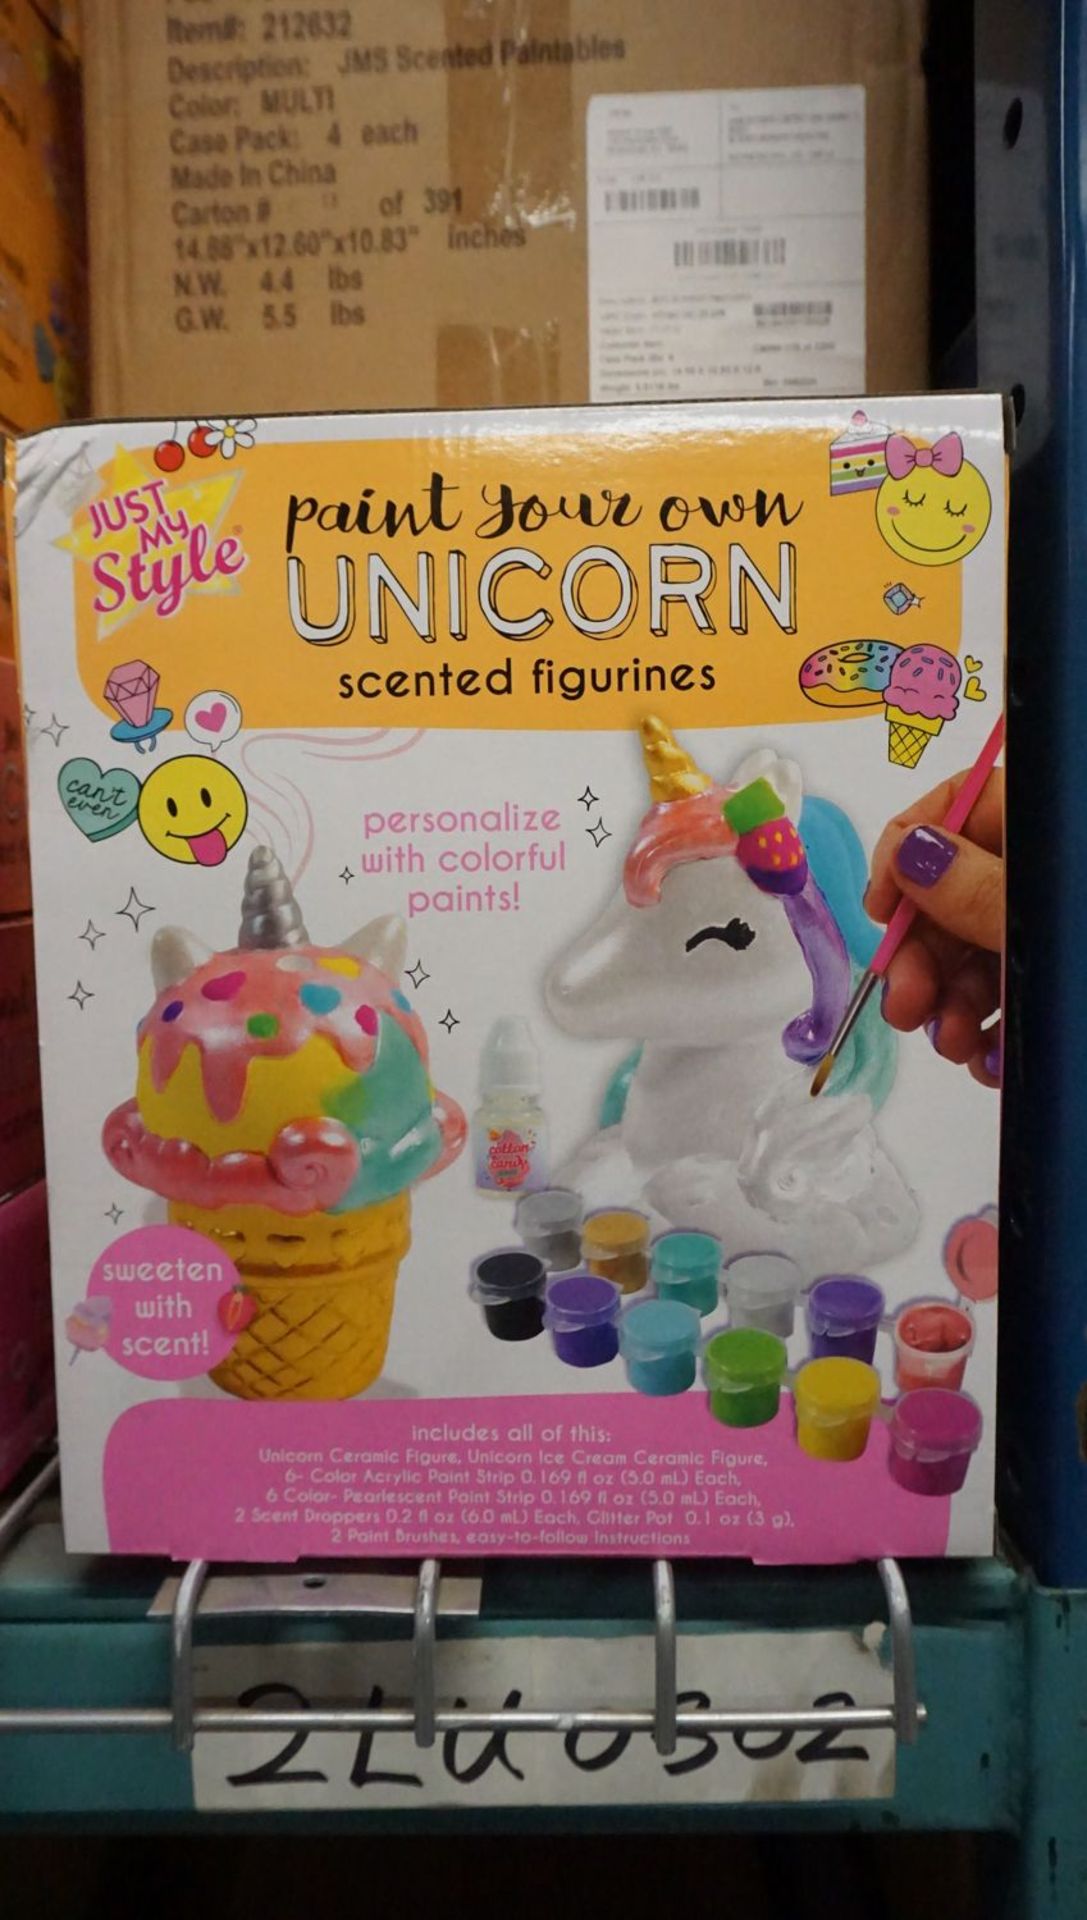 BOXES - JUST MY STYLE PAINT YOUR OWN UNICORN SCENTED FIGURINES (4 PCS/BOX) - Image 2 of 2